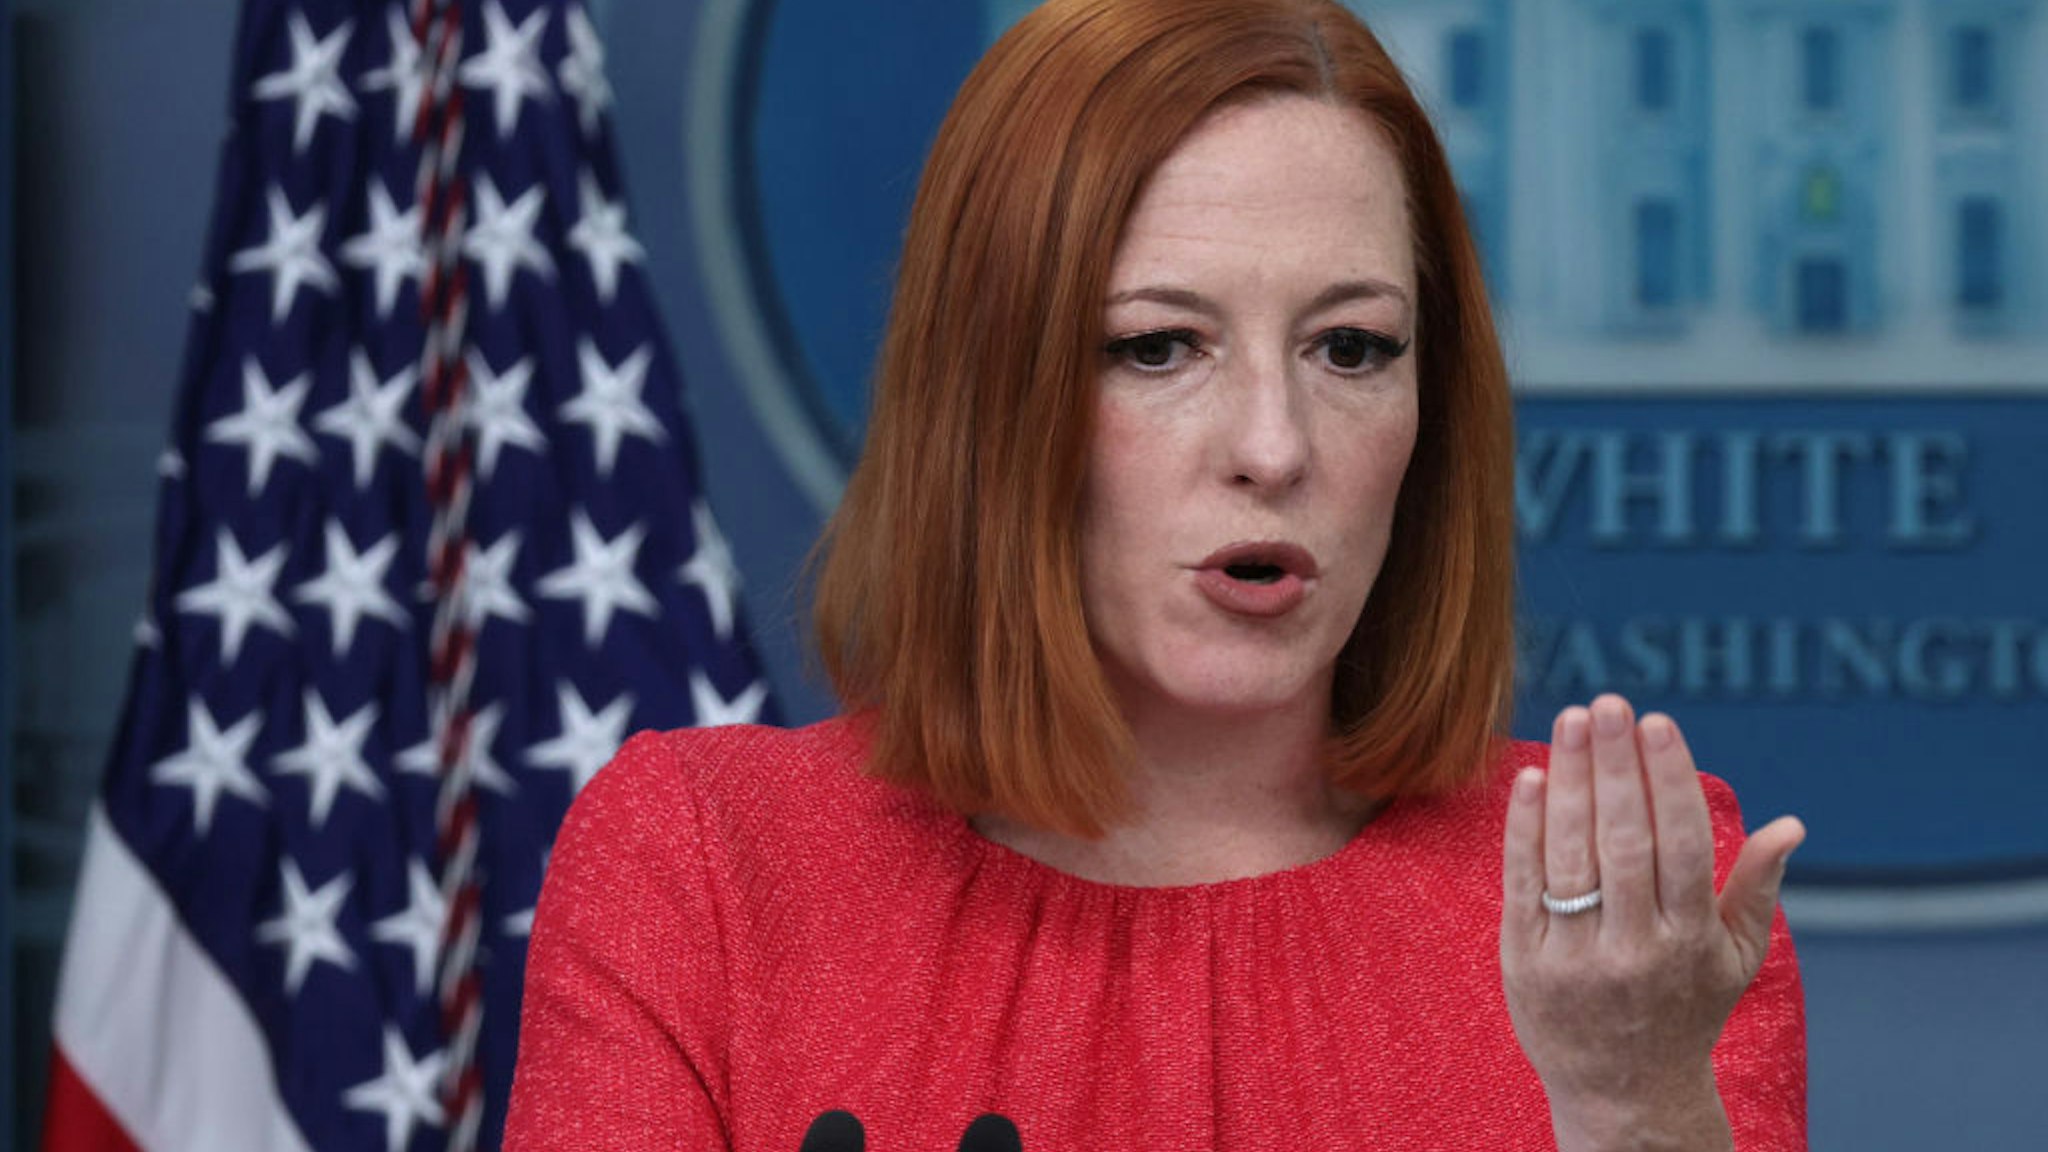 WASHINGTON, DC - MAY 02: White House Press Secretary Jen Psaki speaks during a White House daily press briefing at the James Brady Press Briefing Room at the White House on May 02, 2022 in Washington, DC. Psaki held a daily press briefing to answer questions from members of the press. (Photo by Alex Wong/Getty Images)